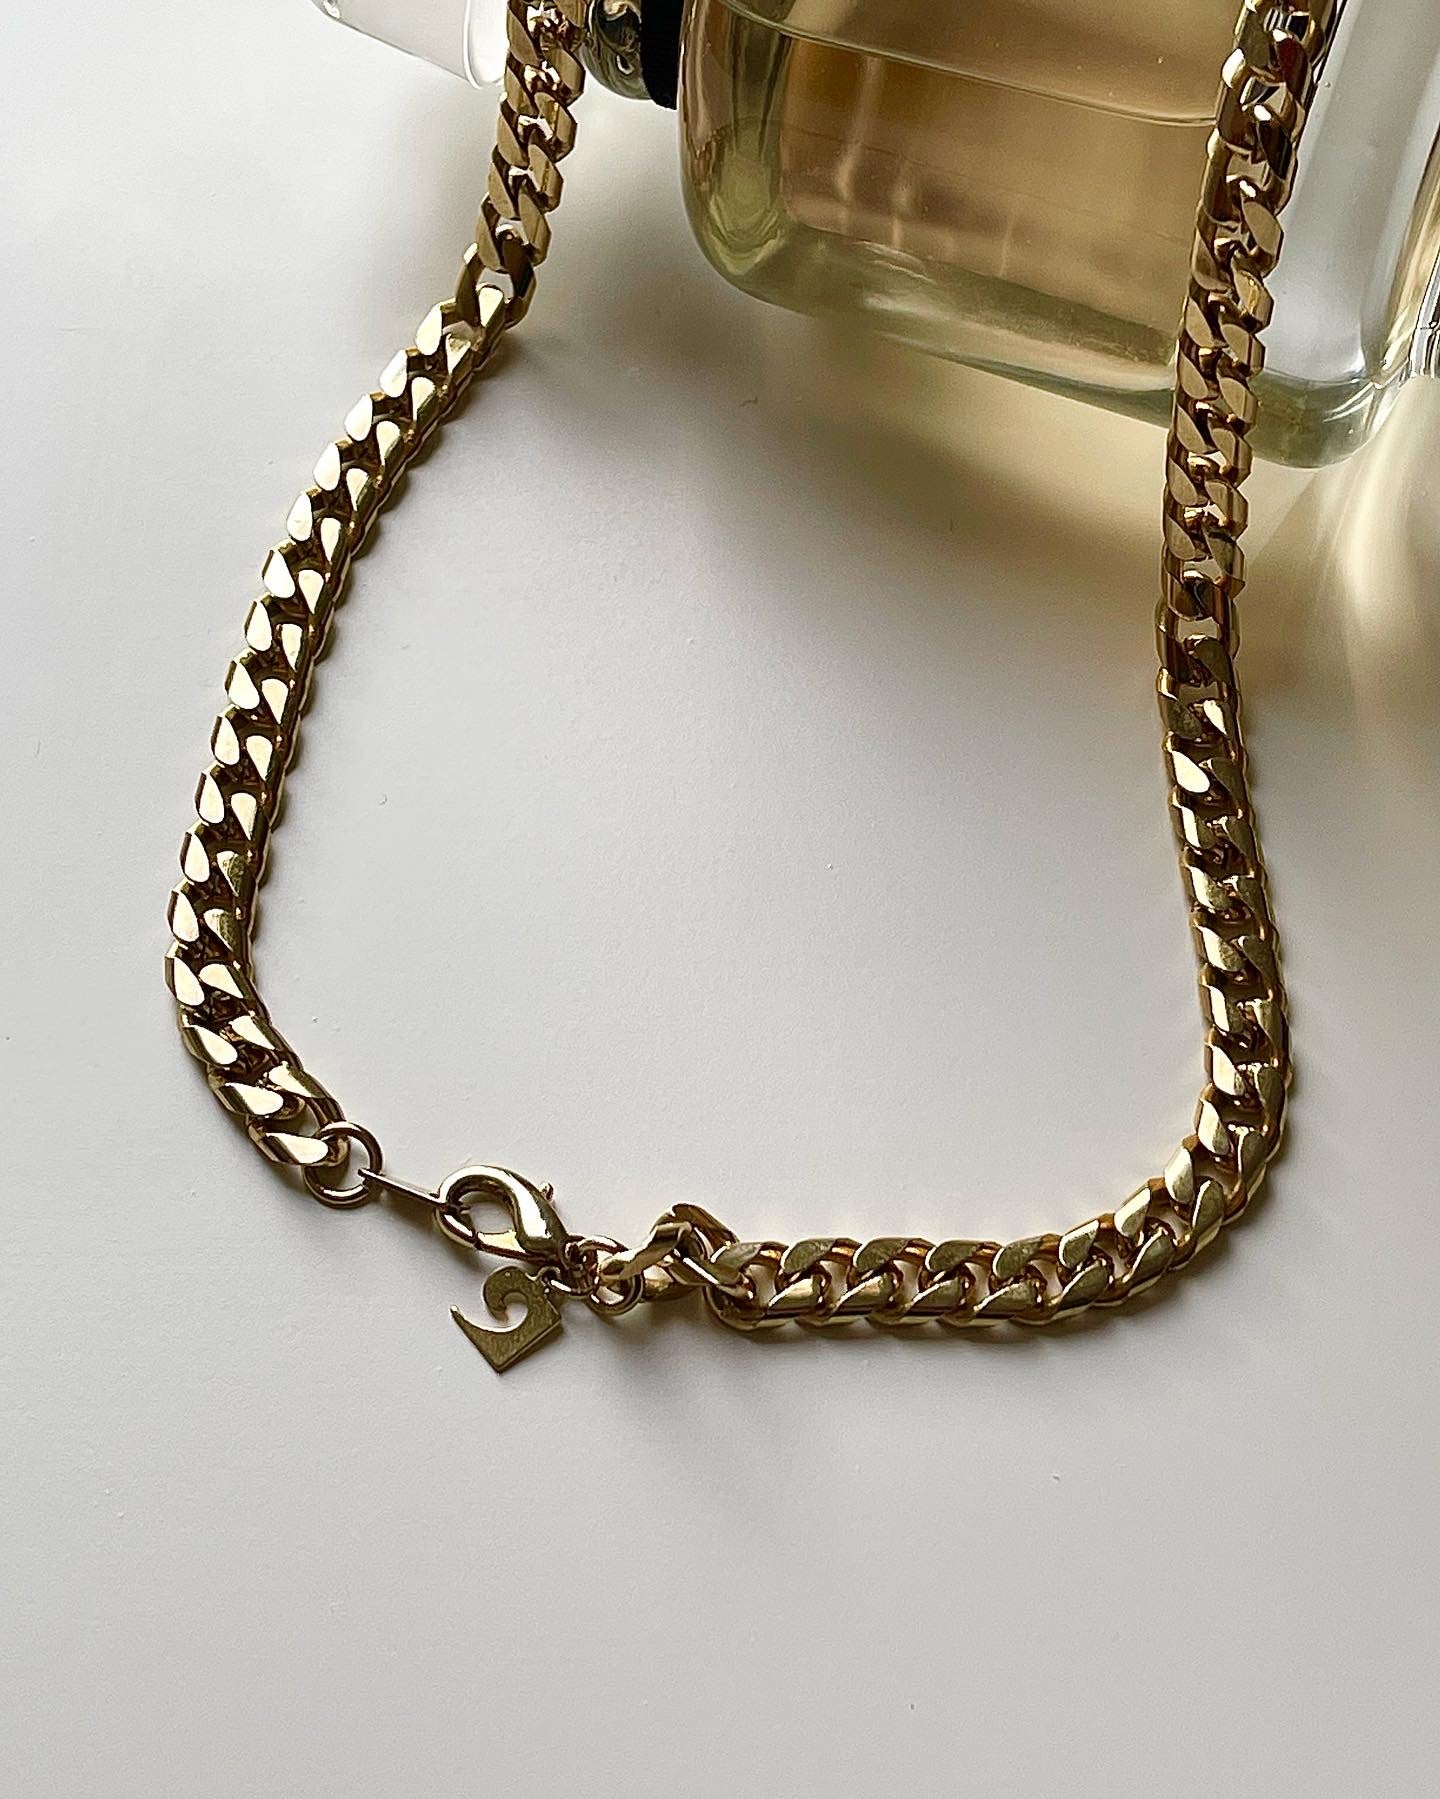 Classic vintage gold-tone chain necklace by Pierre Cardin